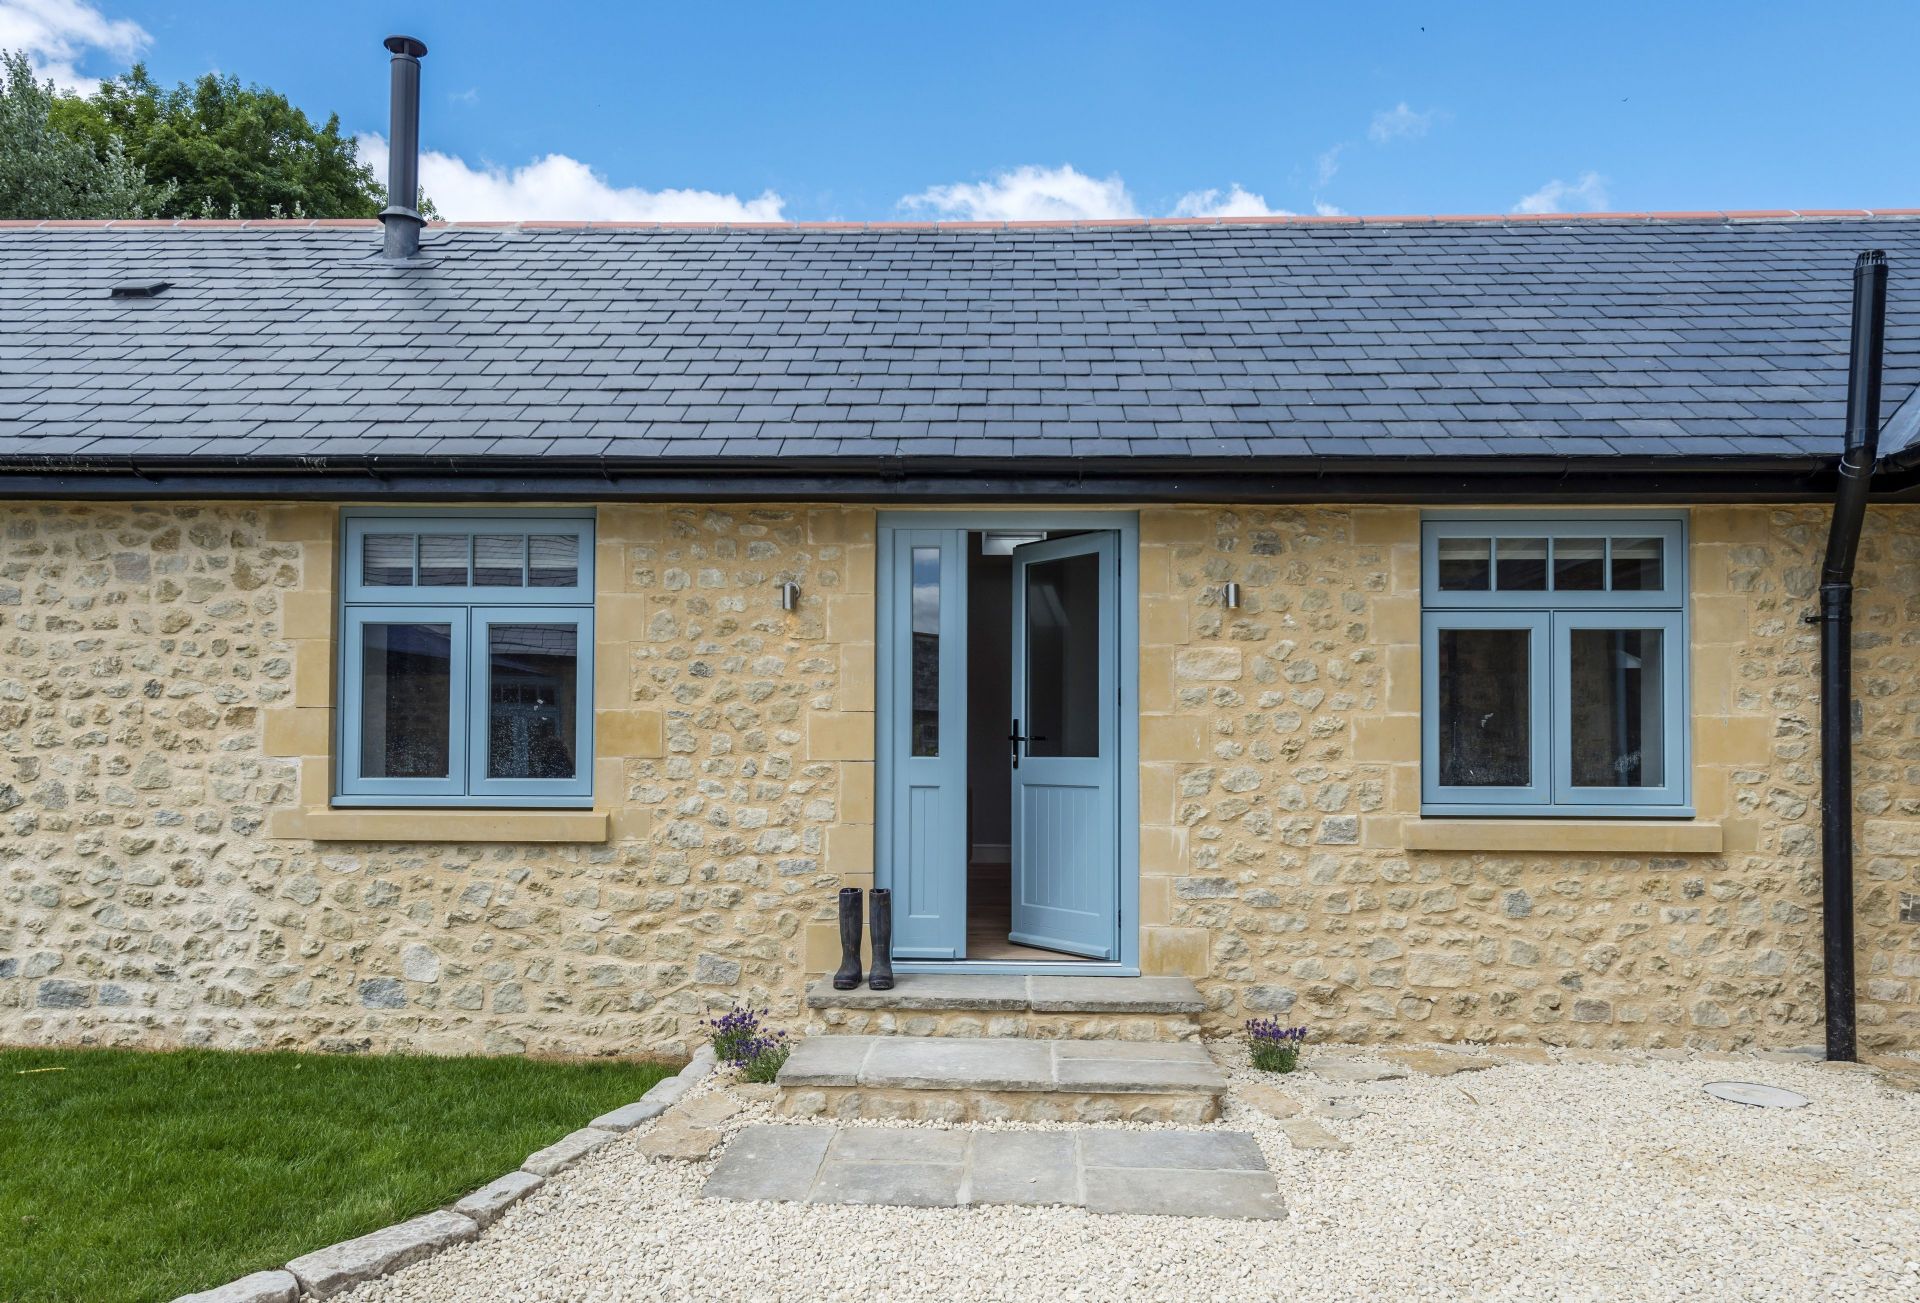 Bower Cottage is located in Beaminster and surrounding villages